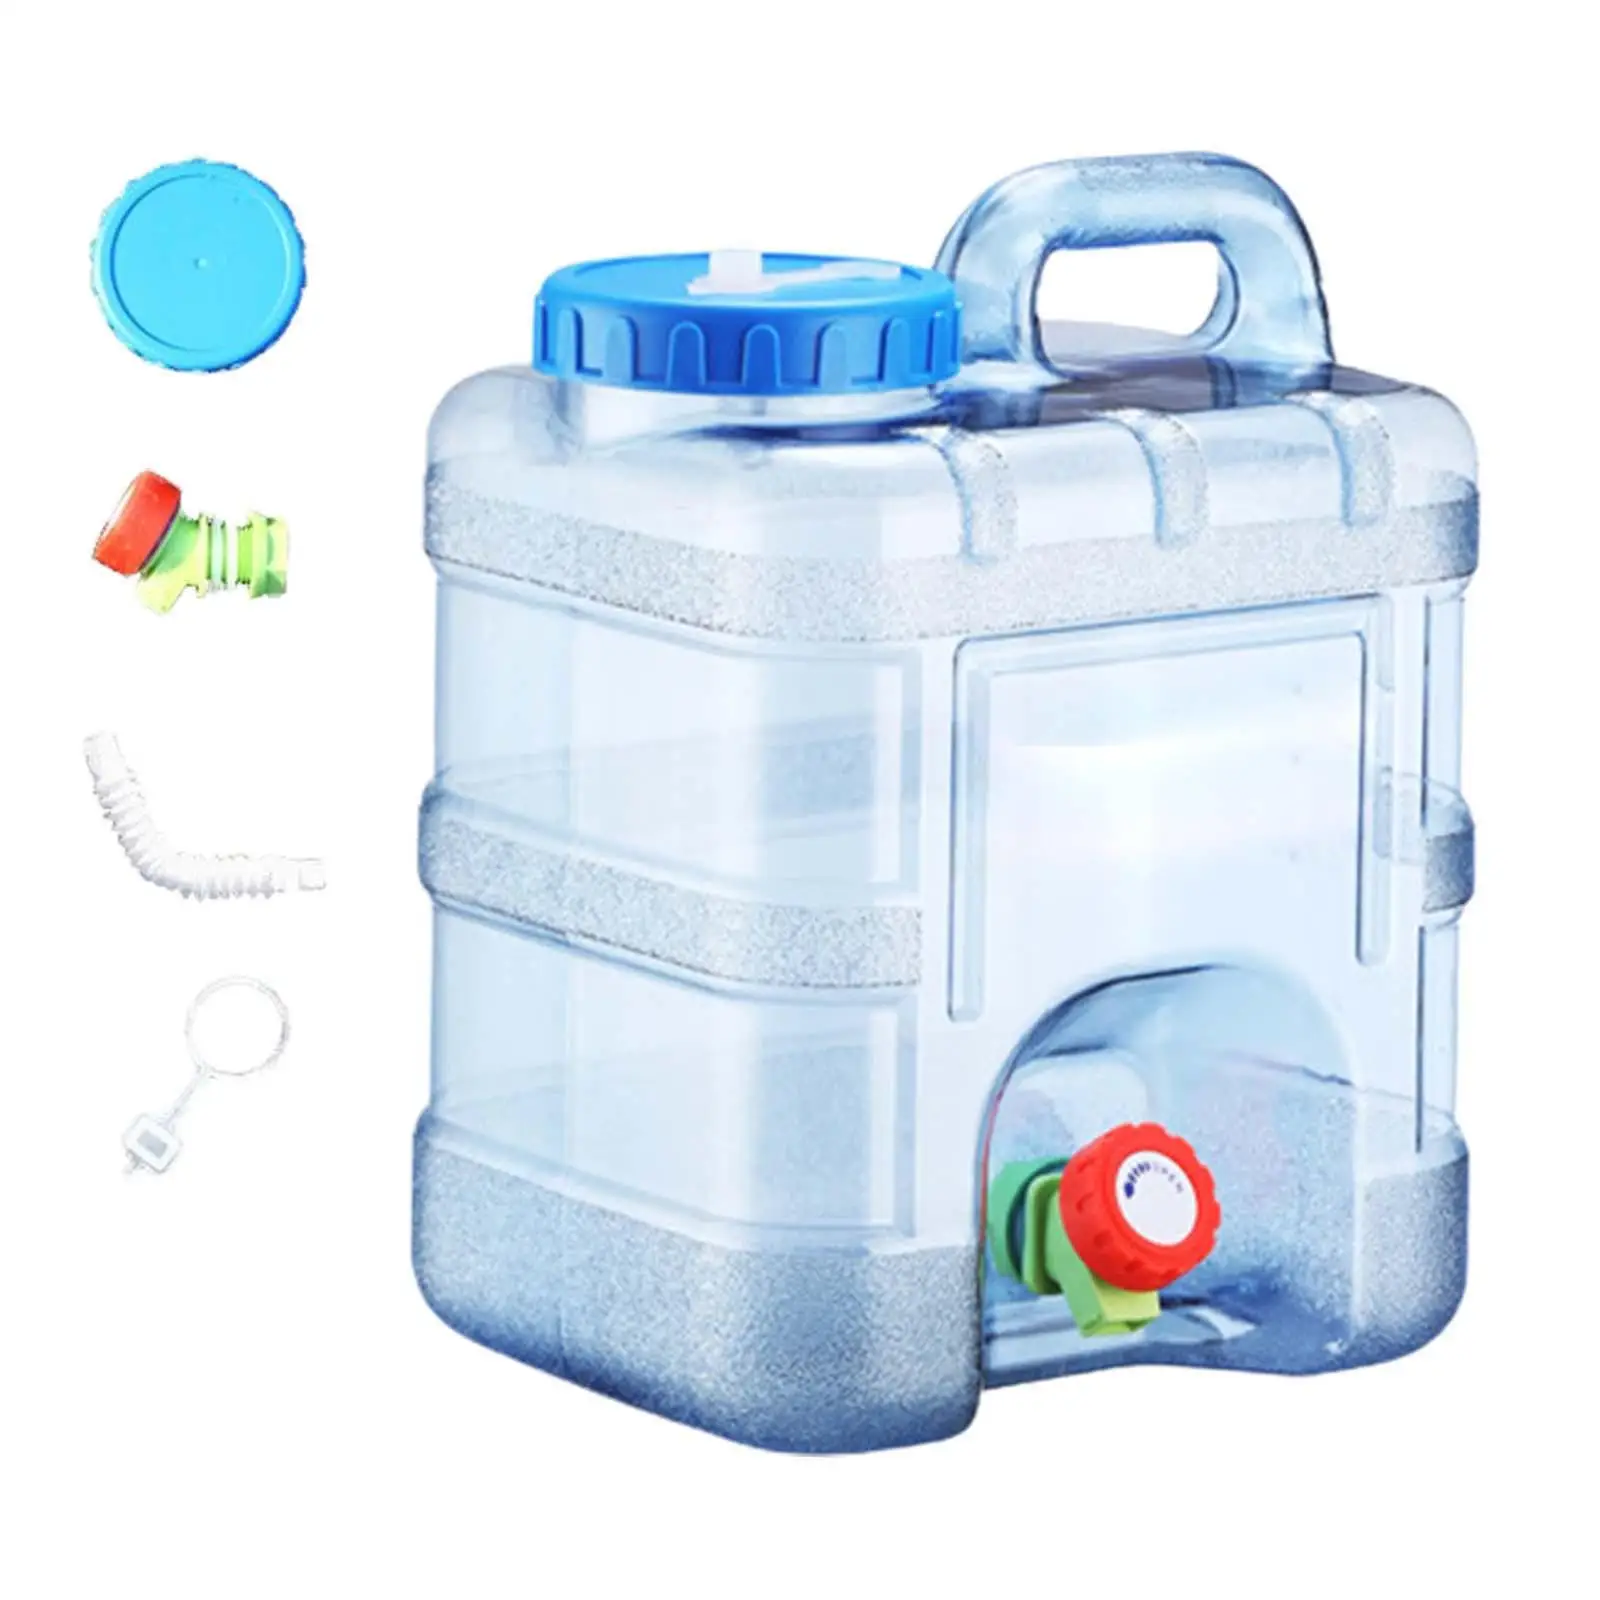 Camping Water Container with Faucet Water Bucket Easily Clean Lightweight Multifunctional 10cm Opening Mouth for Car Driving